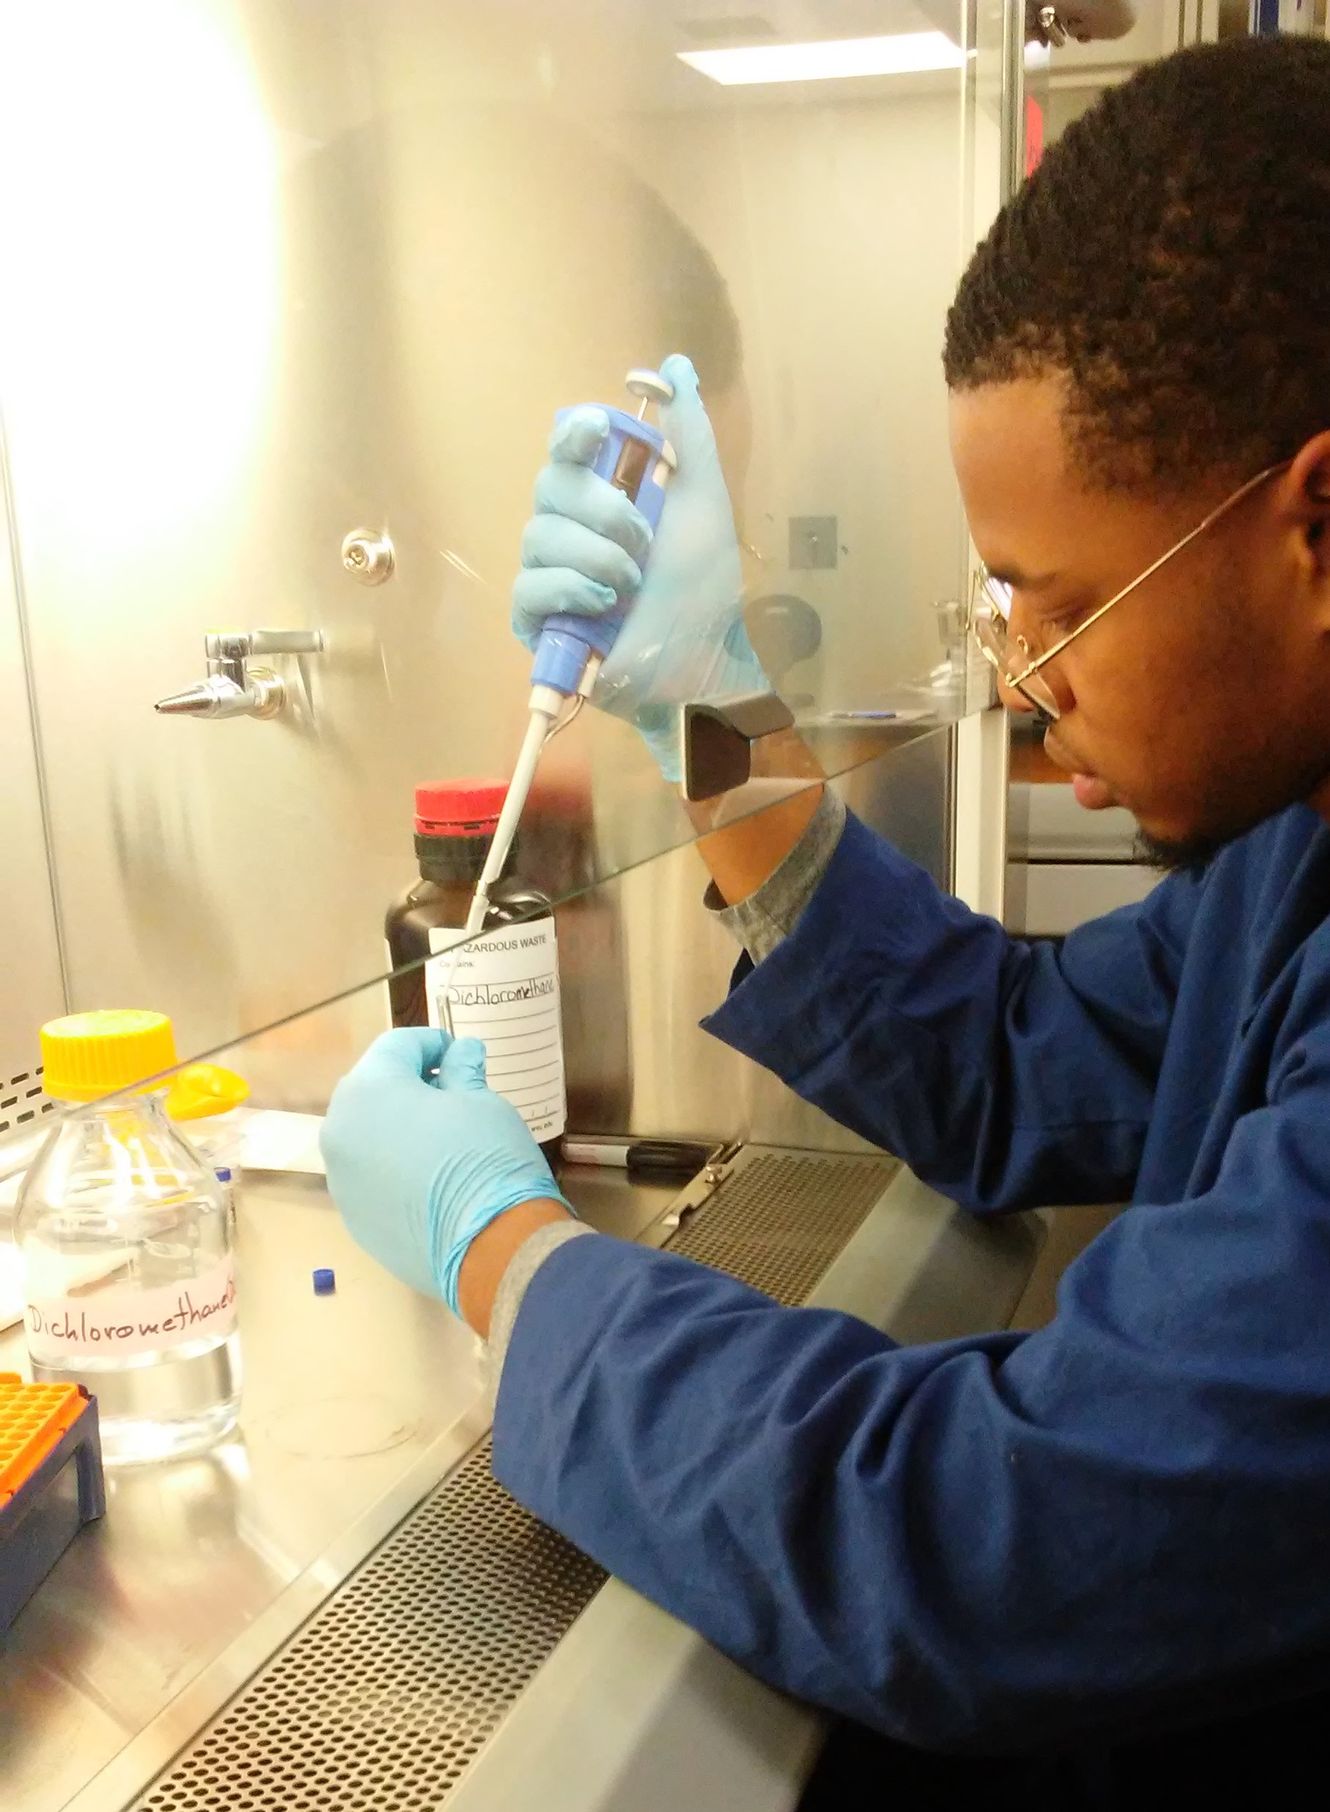 De'Anthony Morris conducting research in the lab